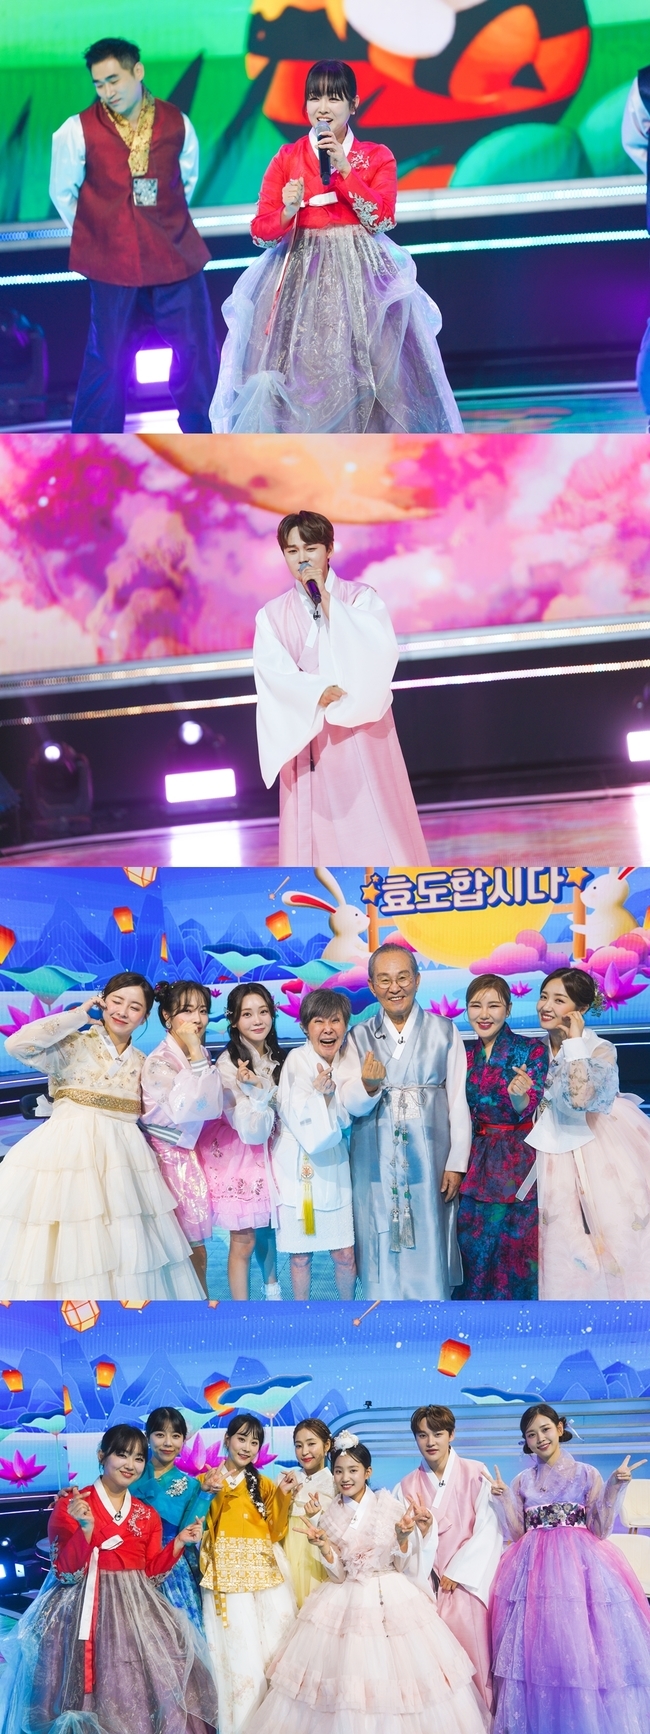 The Miami tells of a healthy situation after overcoming tongue cancer.The 84th episode of TV CHOSUNs entertainment show Tuesday is a Good Night (hereinafter referred to as Hwabeom), which will air on Sept. 12, will feature a special feature called Lets Filial Piety to welcome Chuseok, featuring ultra-special guests from Yoon Bok Hee, yunhanggi to The Miami and seojin bak to present various stages.On this day, The Miami appears on the opening stage, singing his song Honey Taste. The smile of The Miami is also welcomed by the cast of Hwabeom.MC Jang Min-Ho greets The Miami, who has met the public again with a healthy appearance after overcoming the tongue cancer, saying, It looks energetic, and The Miami says, I lost a lot of weight while exercising to keep my health.The Miami, which is also a super mom of four siblings, also tells episodes about the names of their two sons.The Miami, who said he was a fan of actors Jo In-sung and Jo Seung-woo, said, My second sons name is Jo In-sung and my fourth sons name is Jo Seung-woo.I made a name after worrying that I wanted to be so big, he said, surprising everyone.